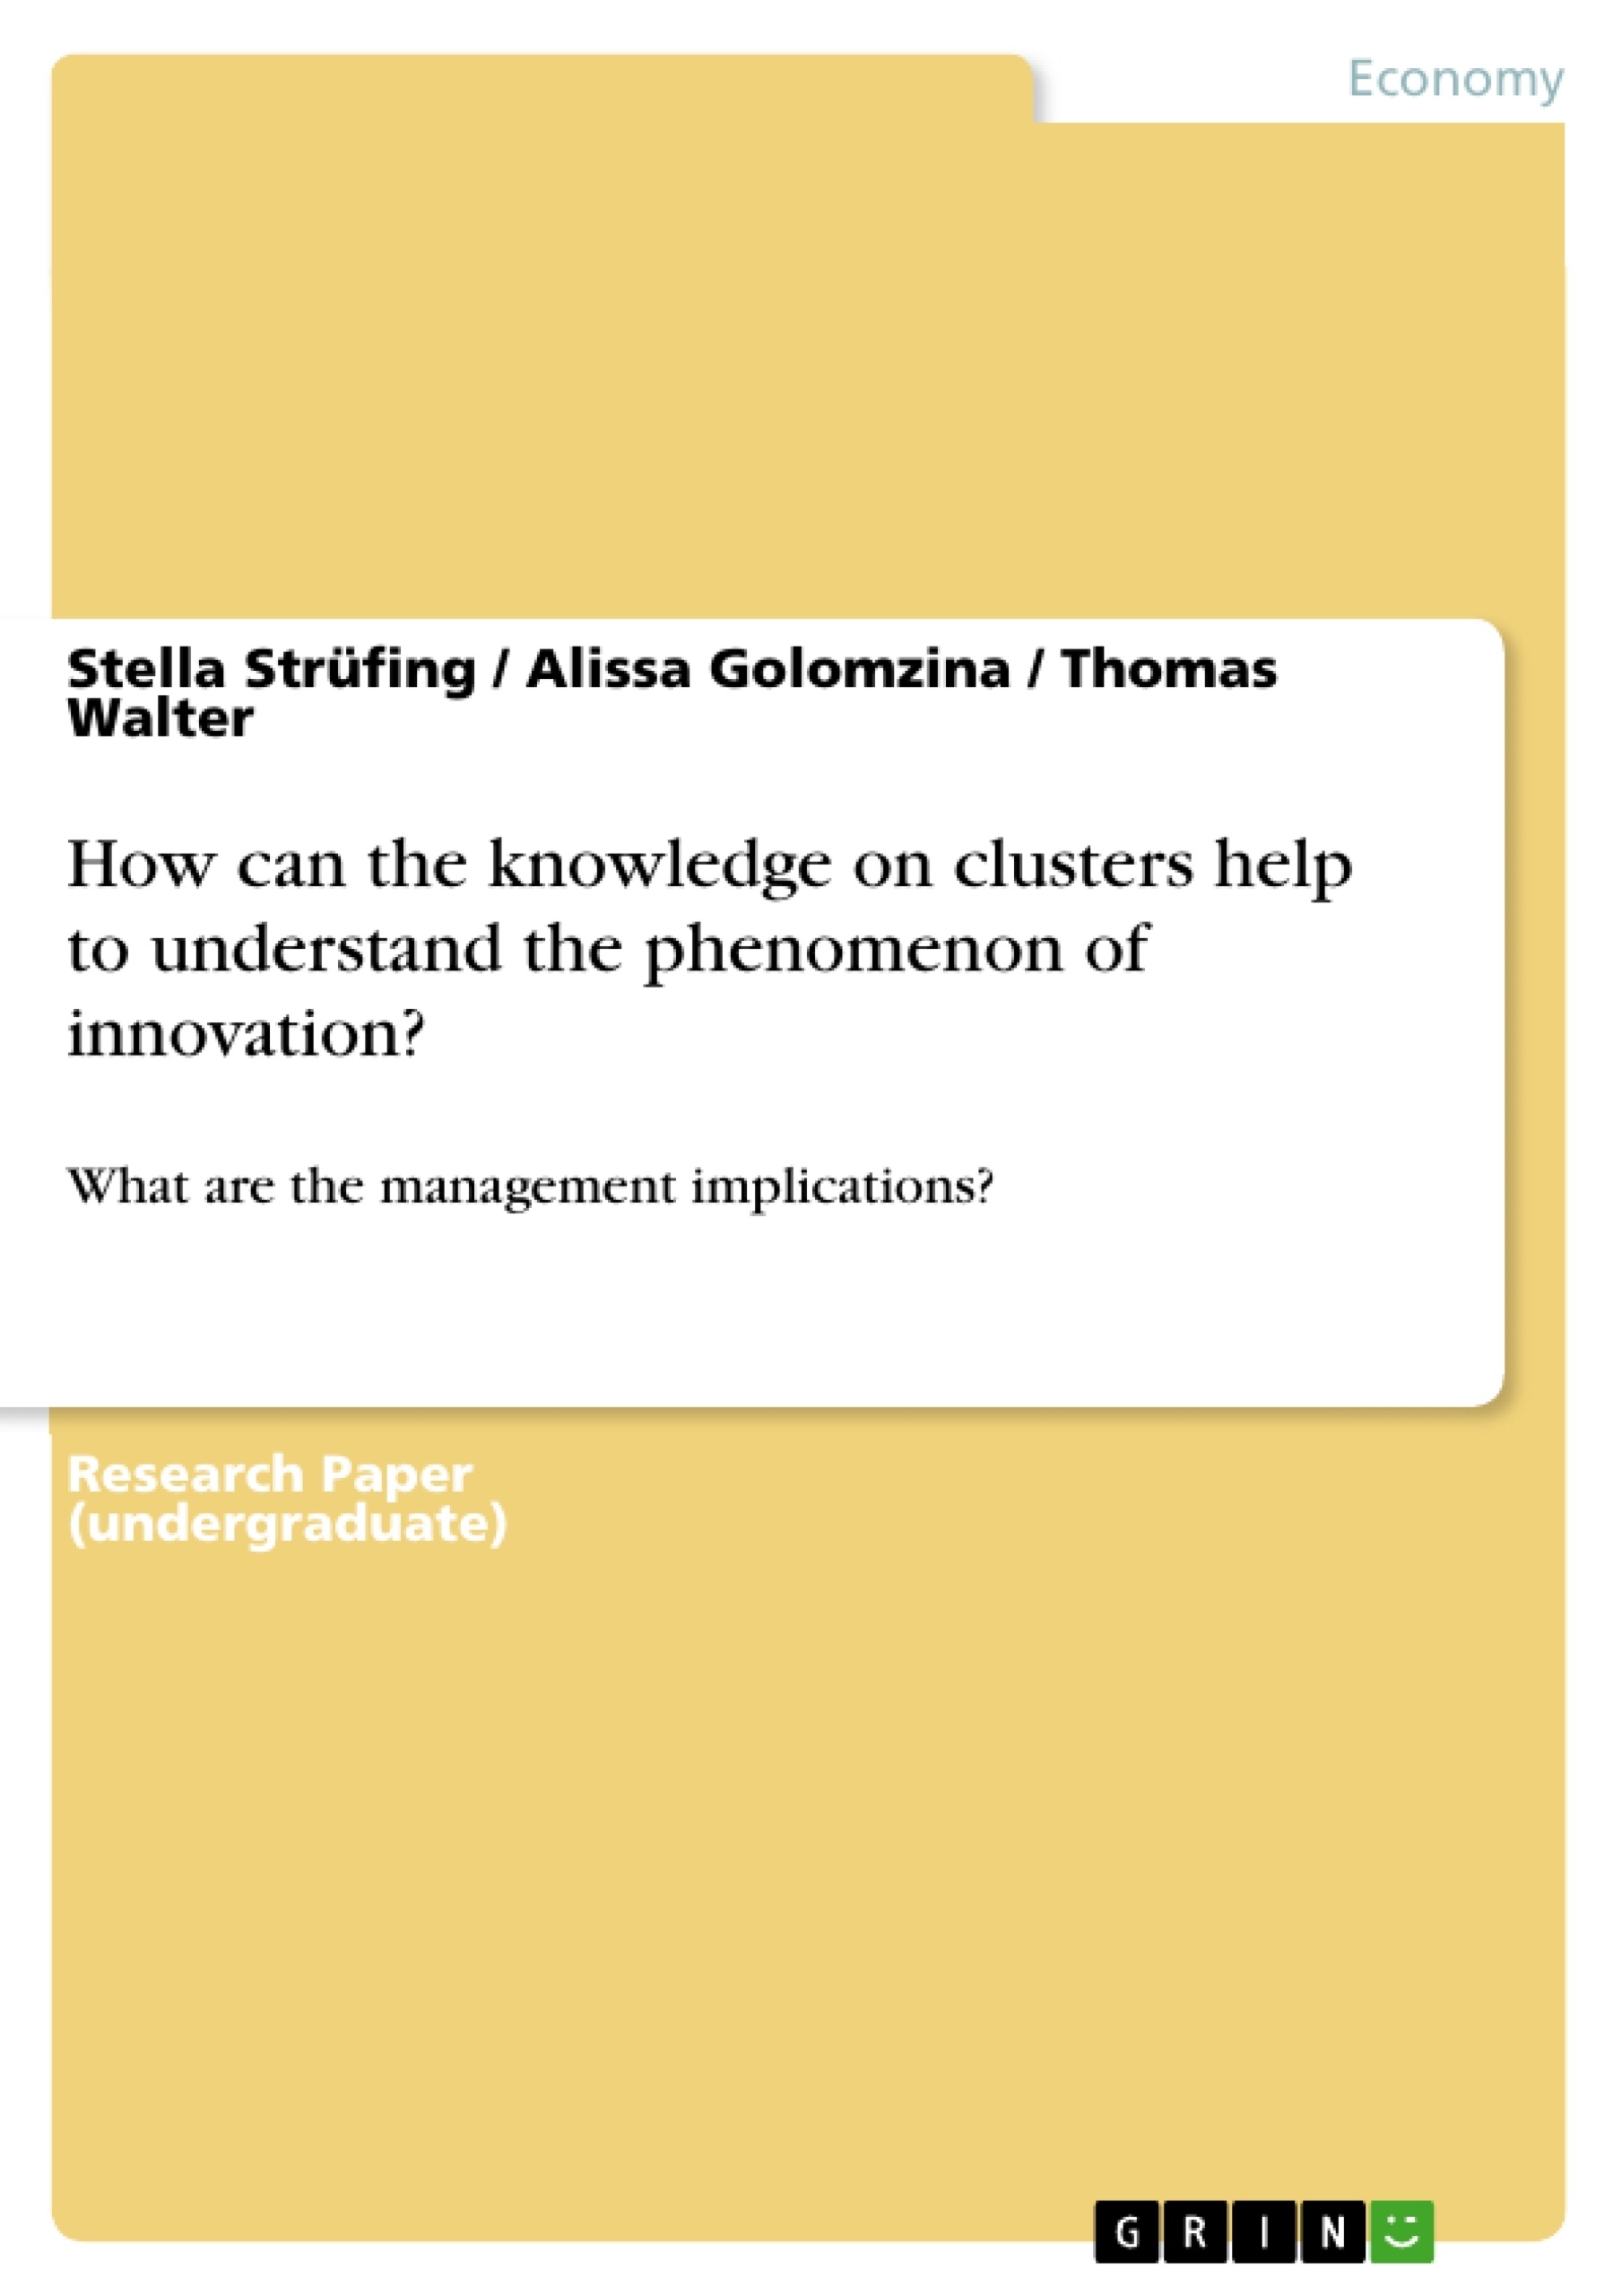 Titre: How can the knowledge on clusters help to understand the phenomenon of innovation?